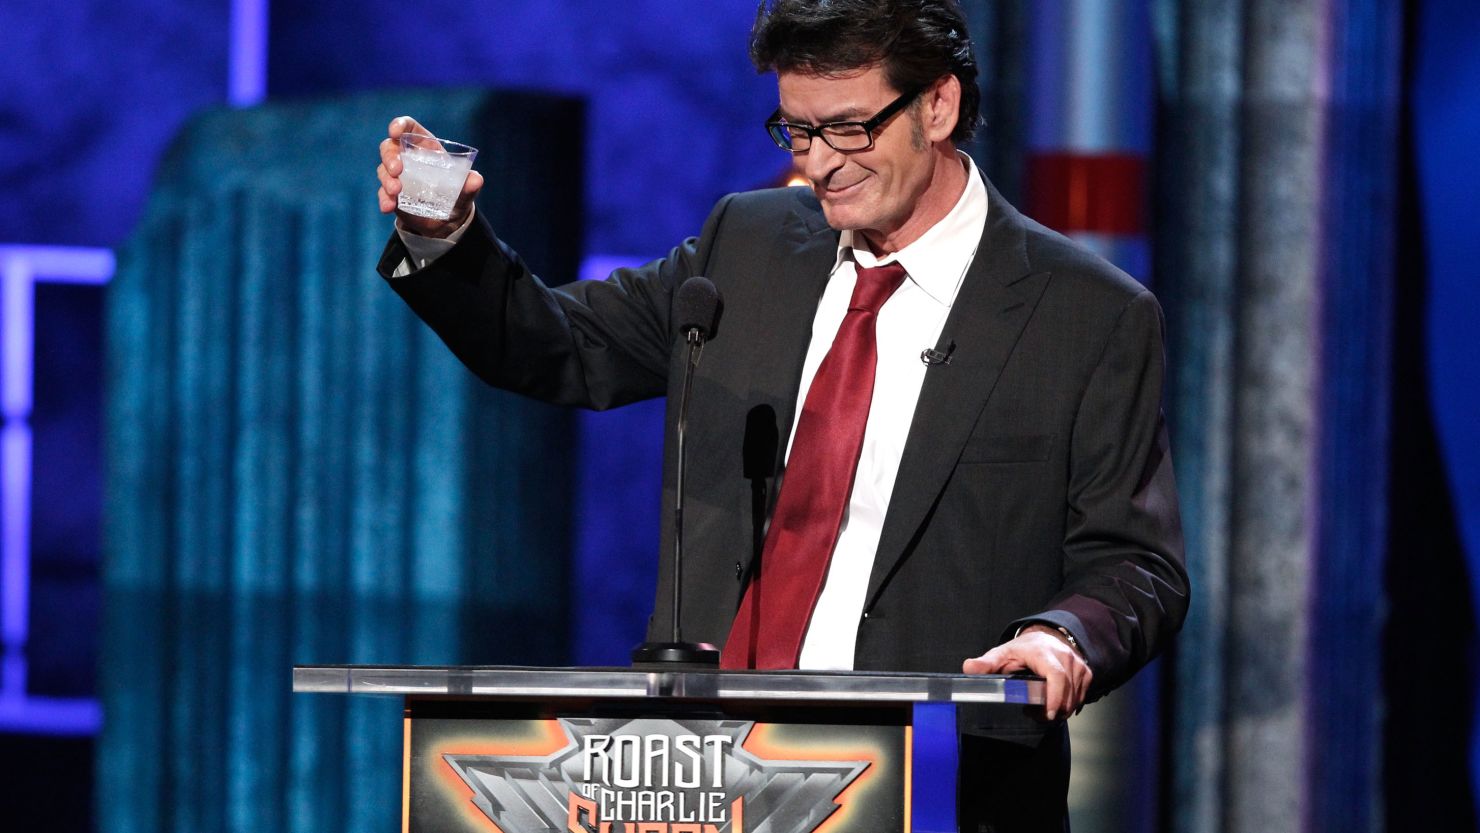 Charlie Sheen got in some jokes of his own at his roast.